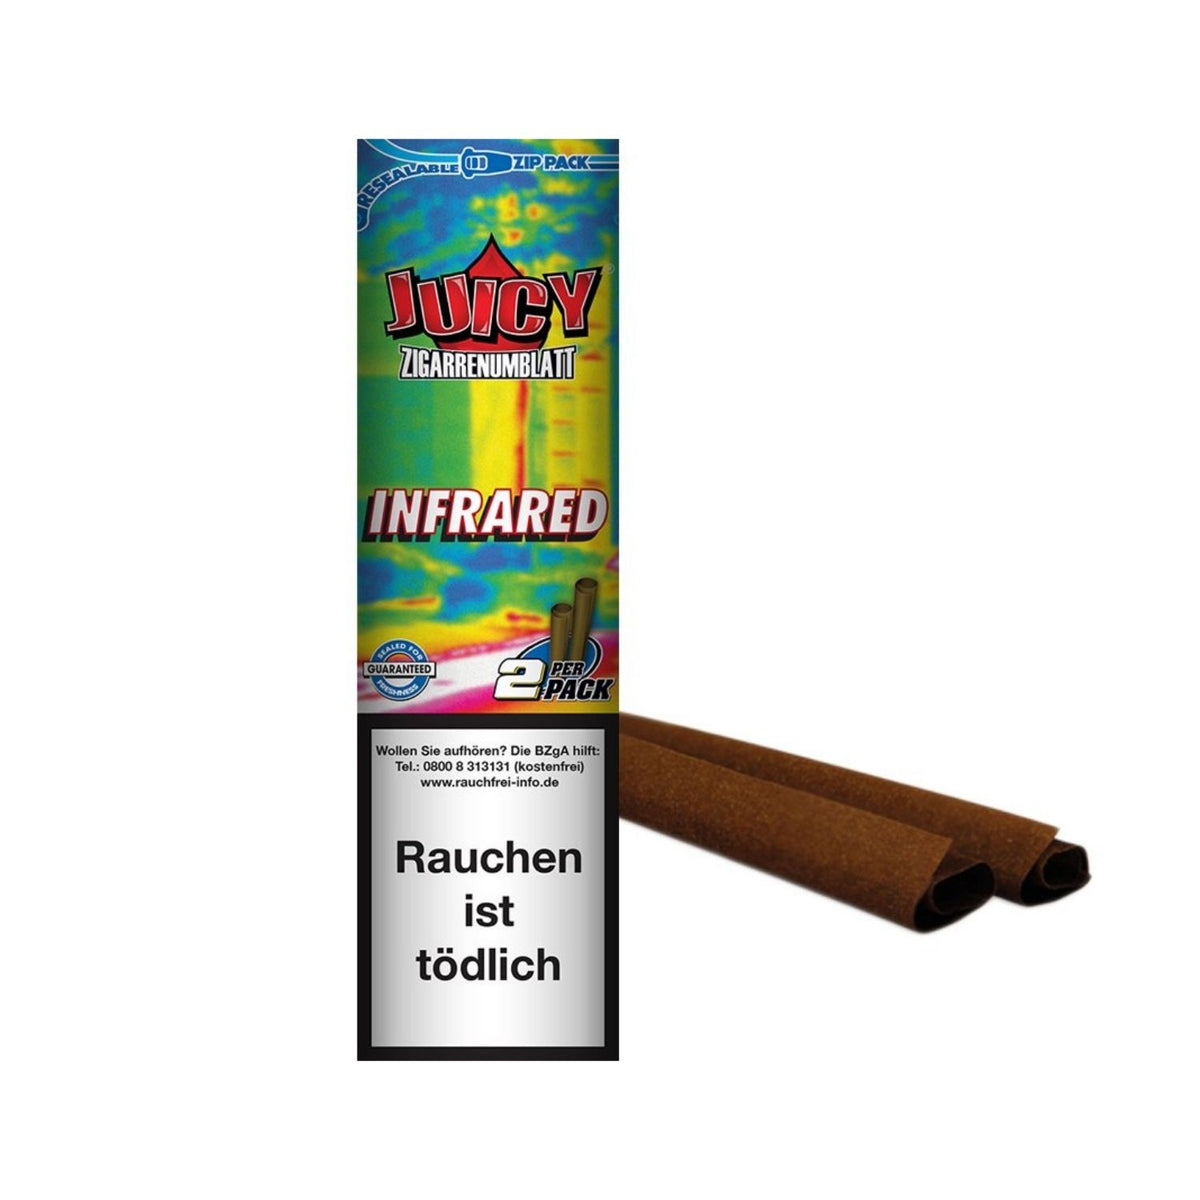 Juicy Double Wraps Blunt - Infrared Flavour